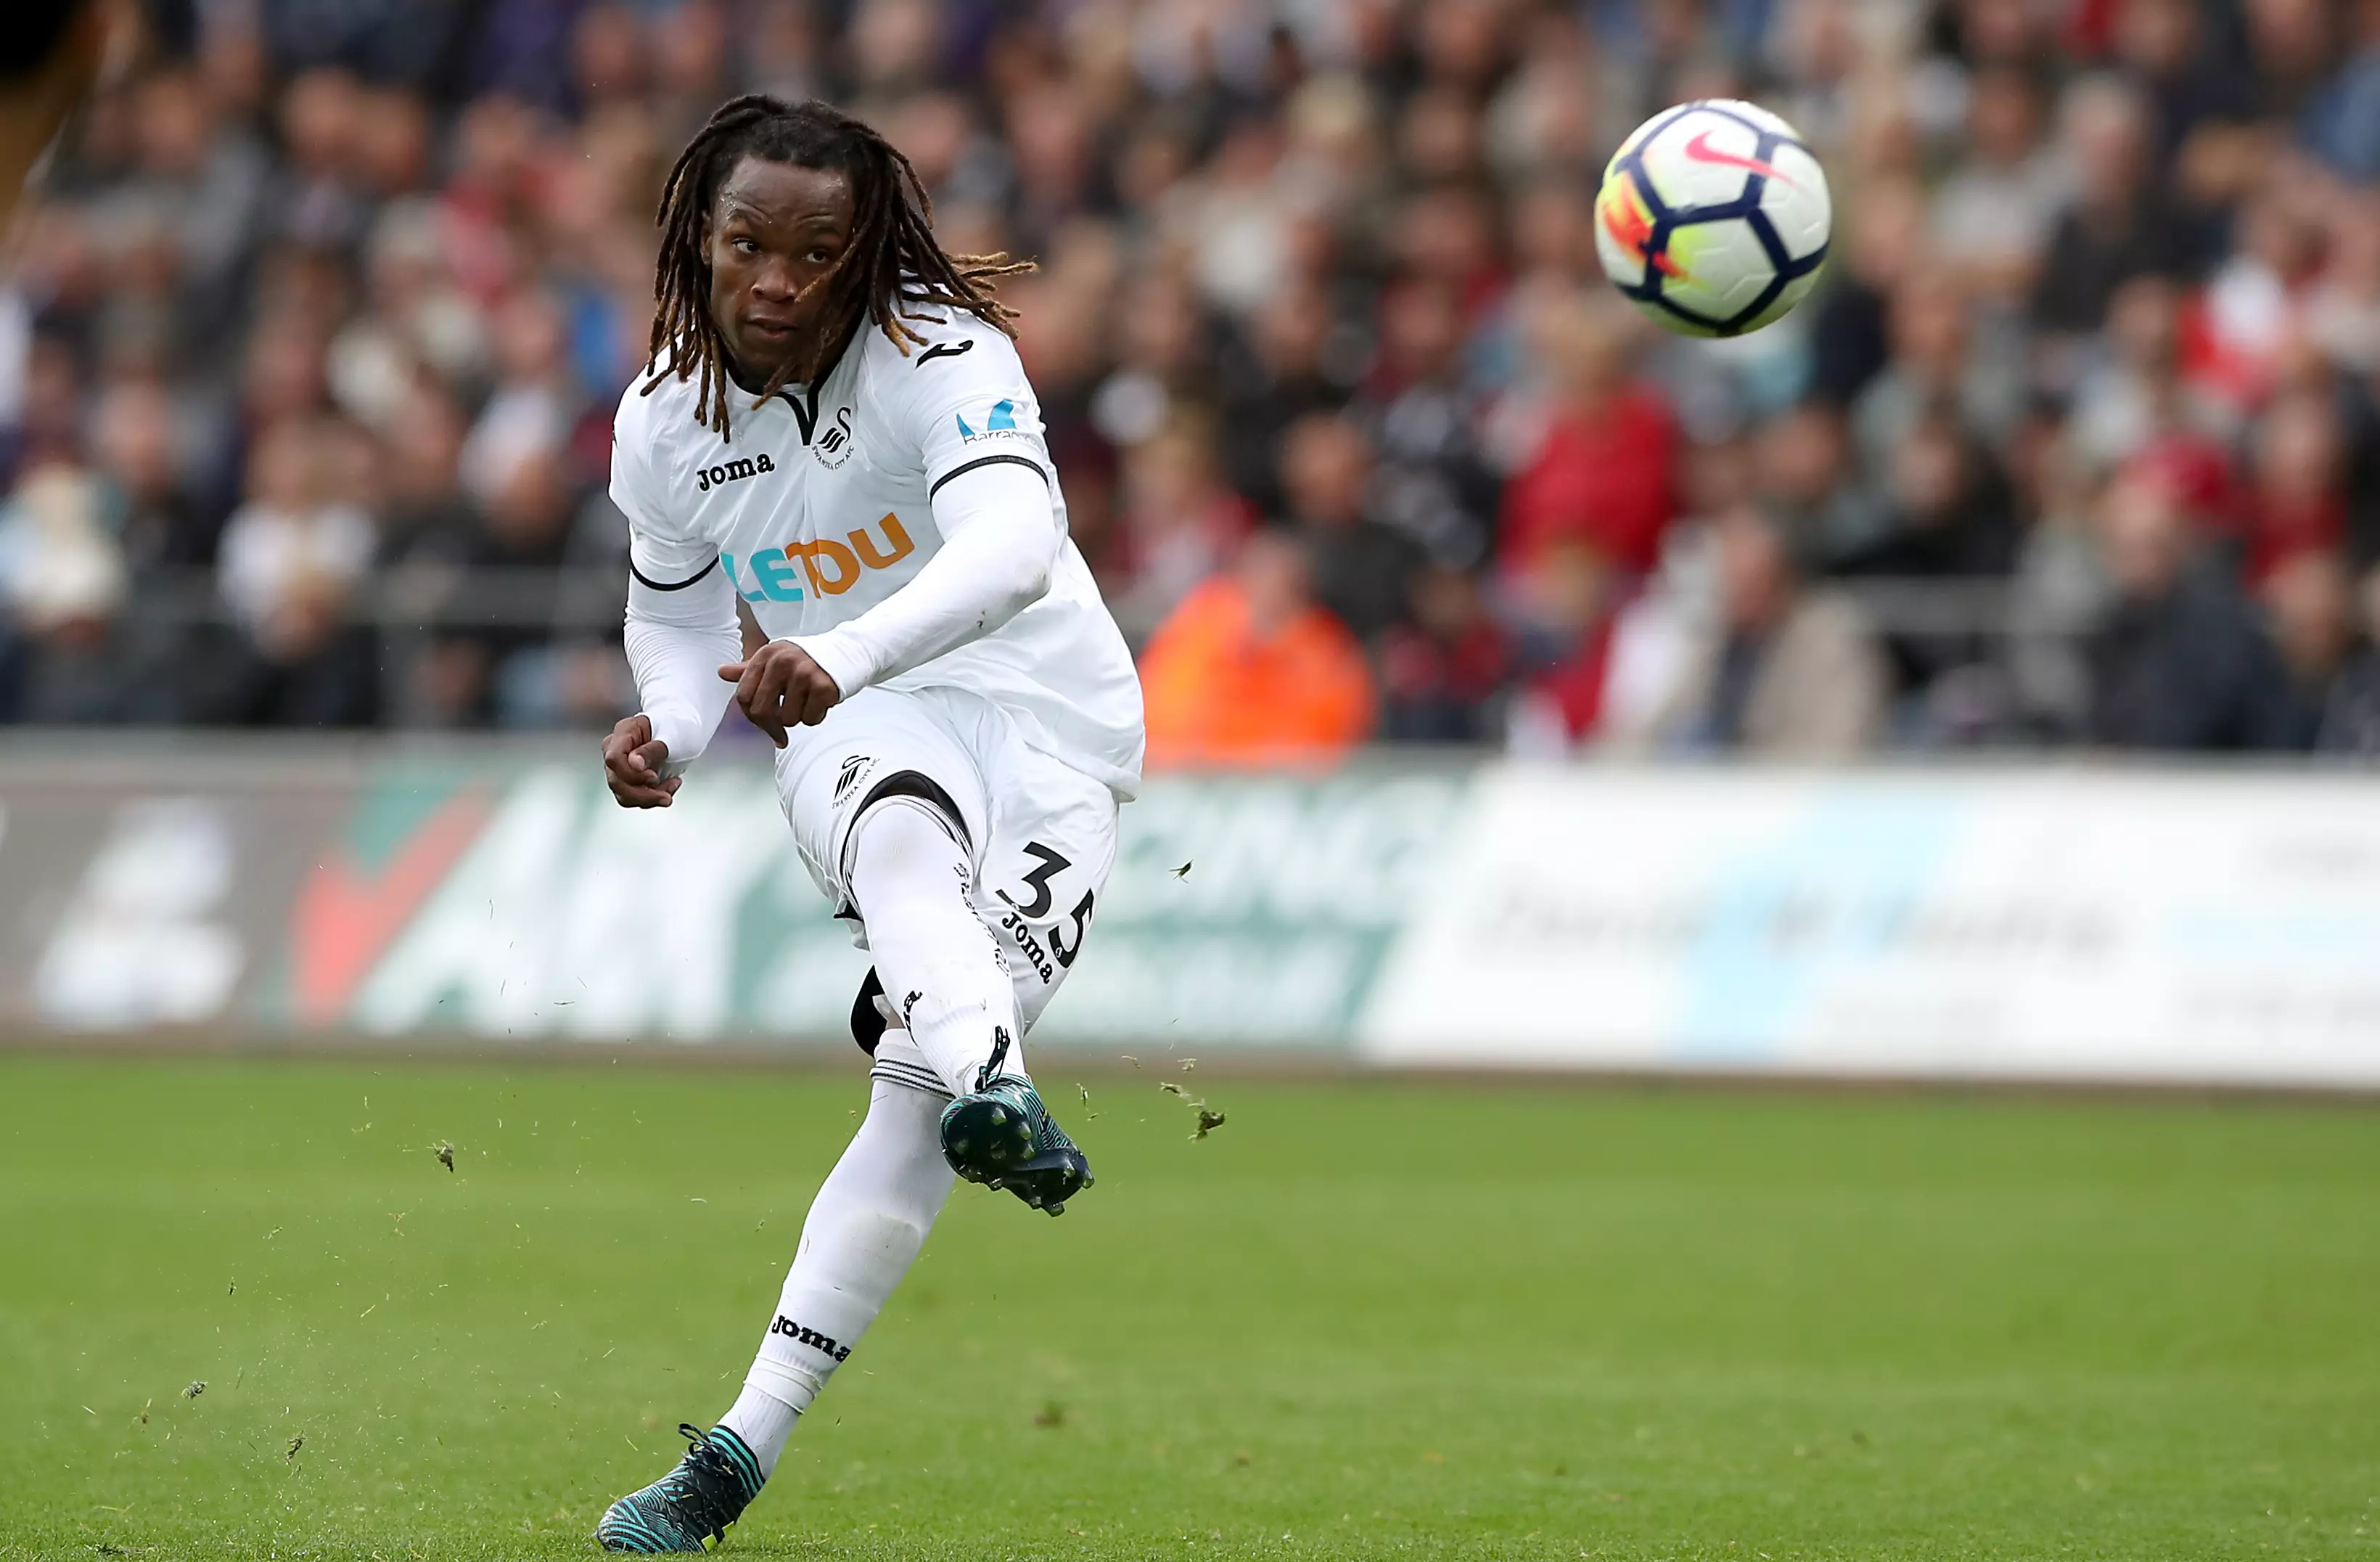 Sanches had a torrid time on loan at Swansea but has since rebuilt his reputation. Image: PA Images